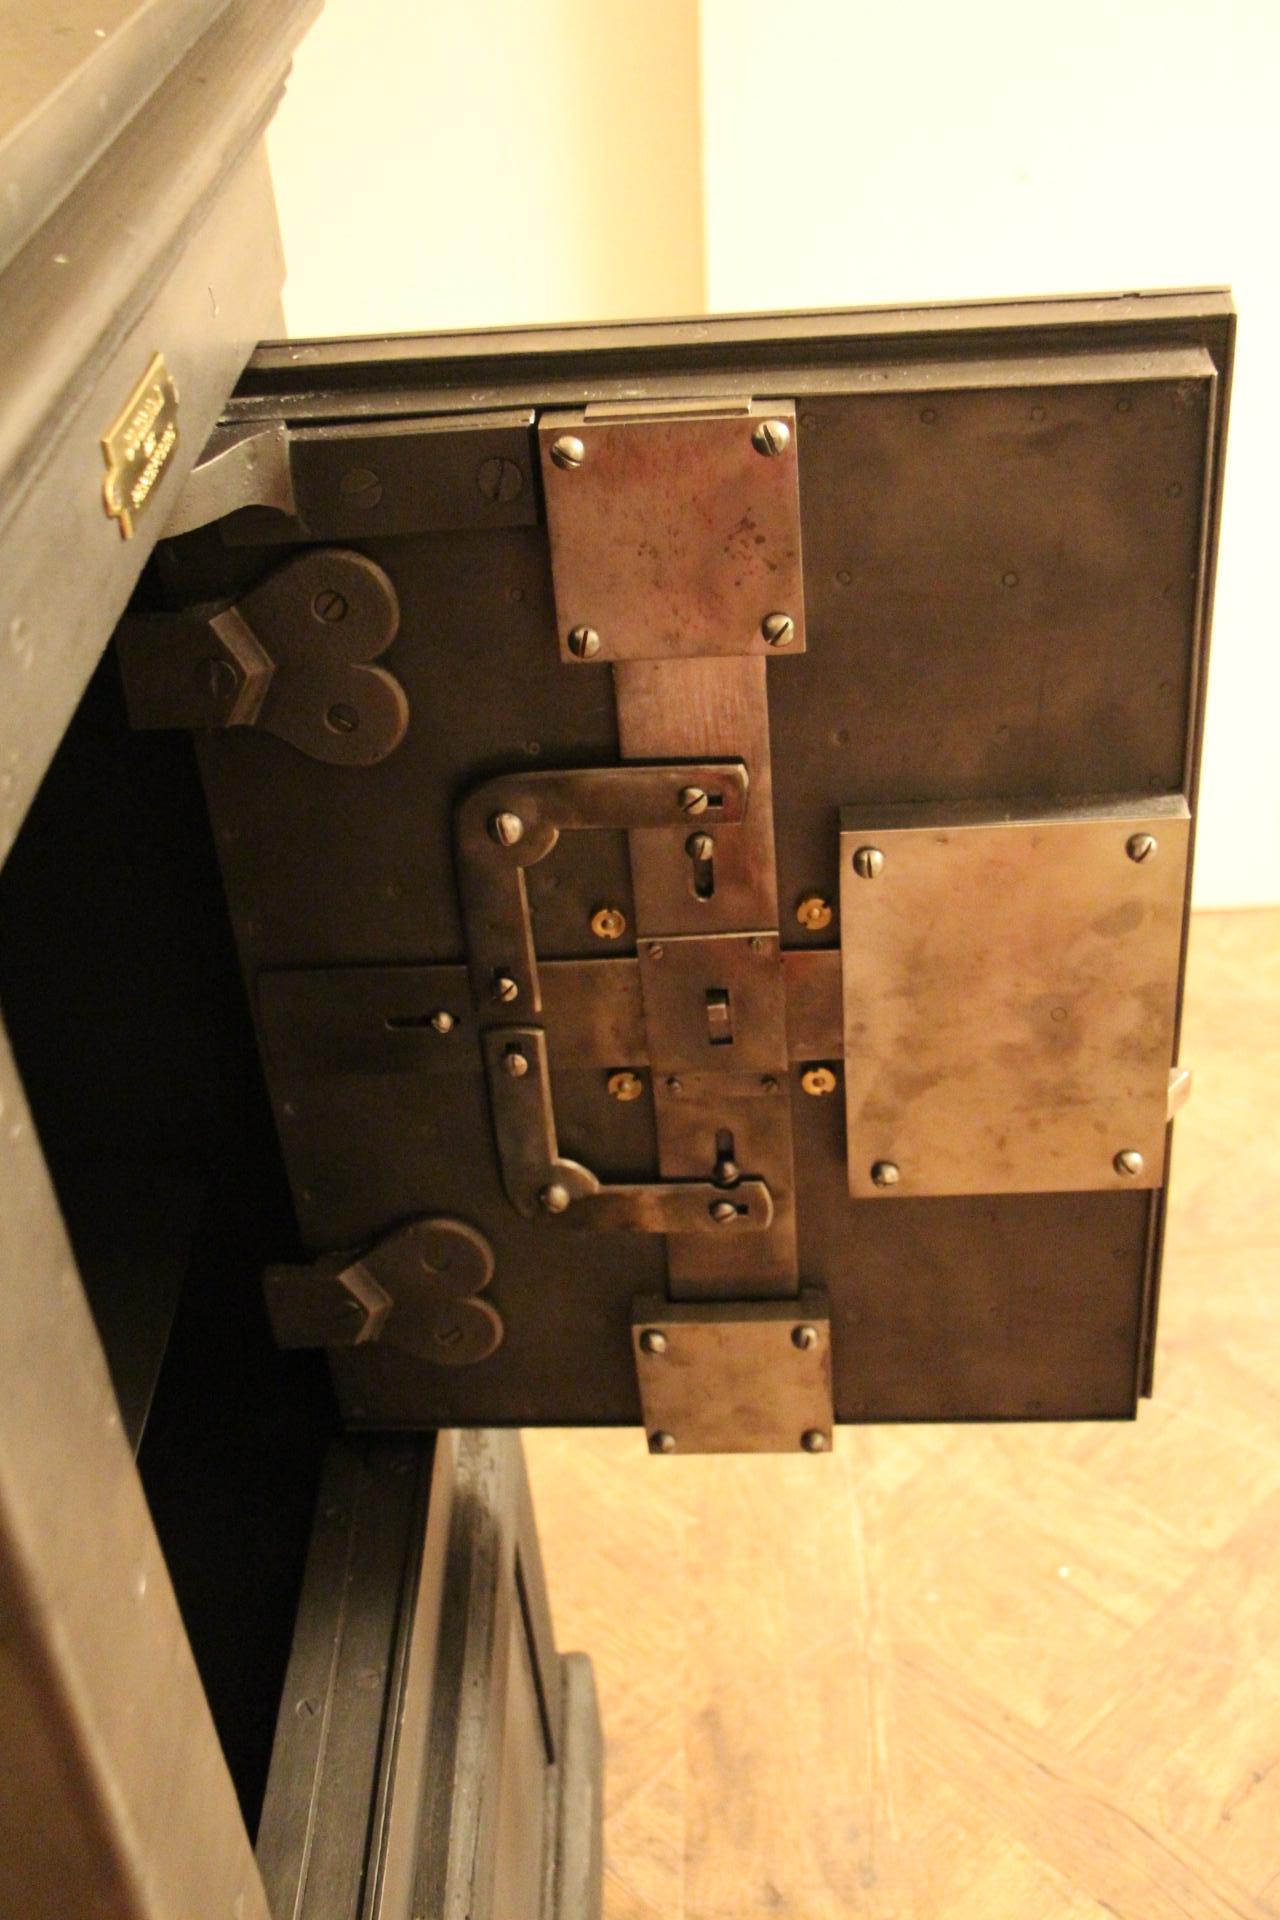 Early 20th Century Black Steel, Iron and Wood Safe with All Keys and Working Combination